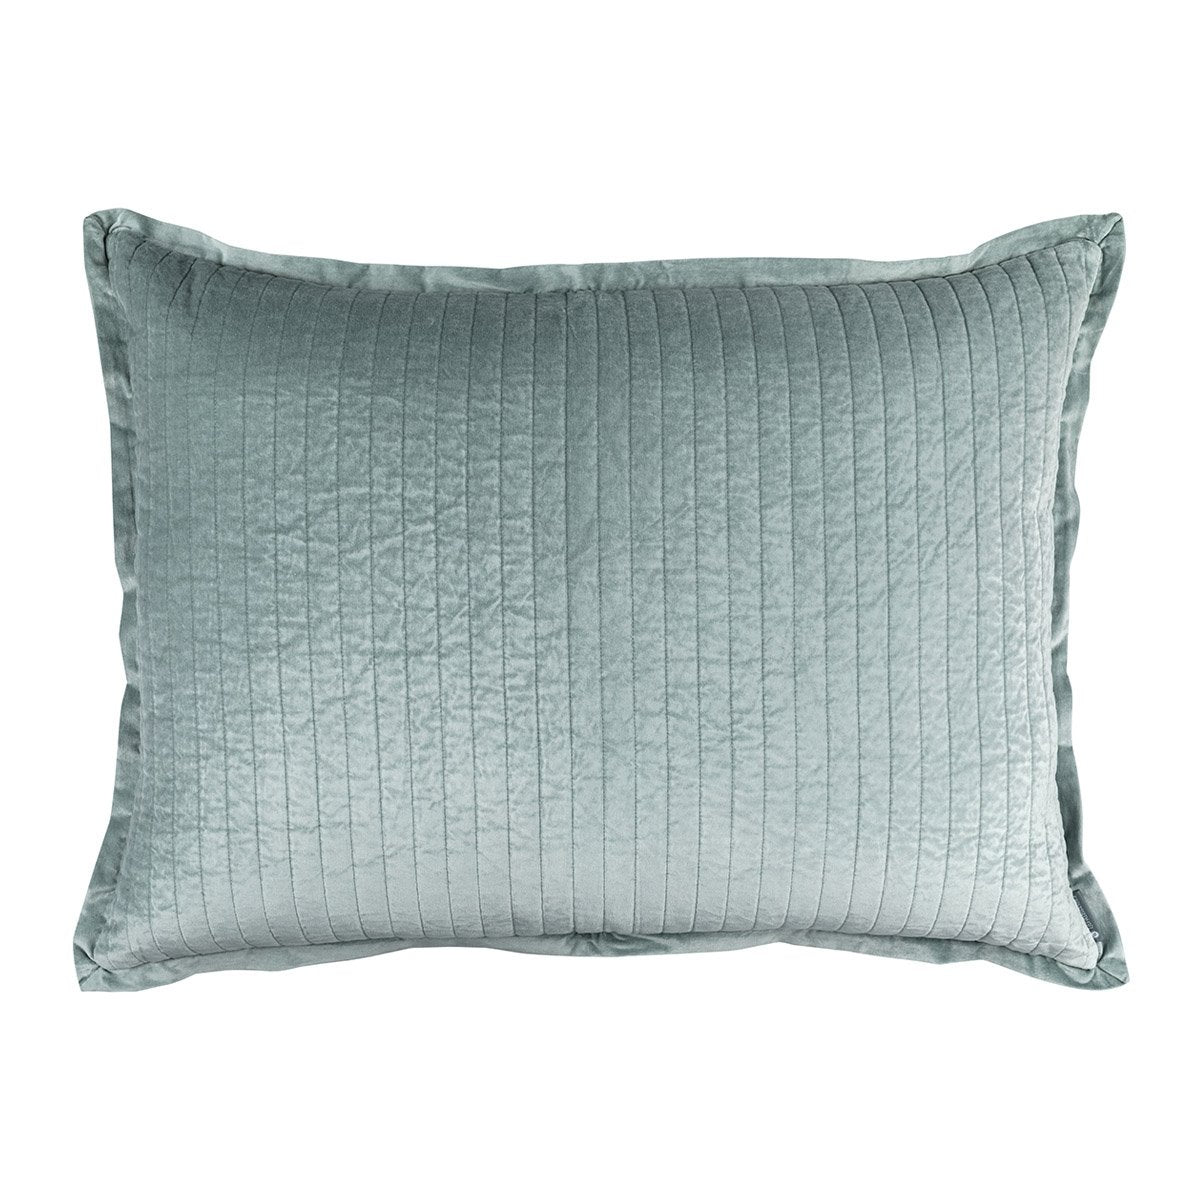 Fig Linens - Lili Alessandra Bedding - Aria Sky Luxe Euro Pillow